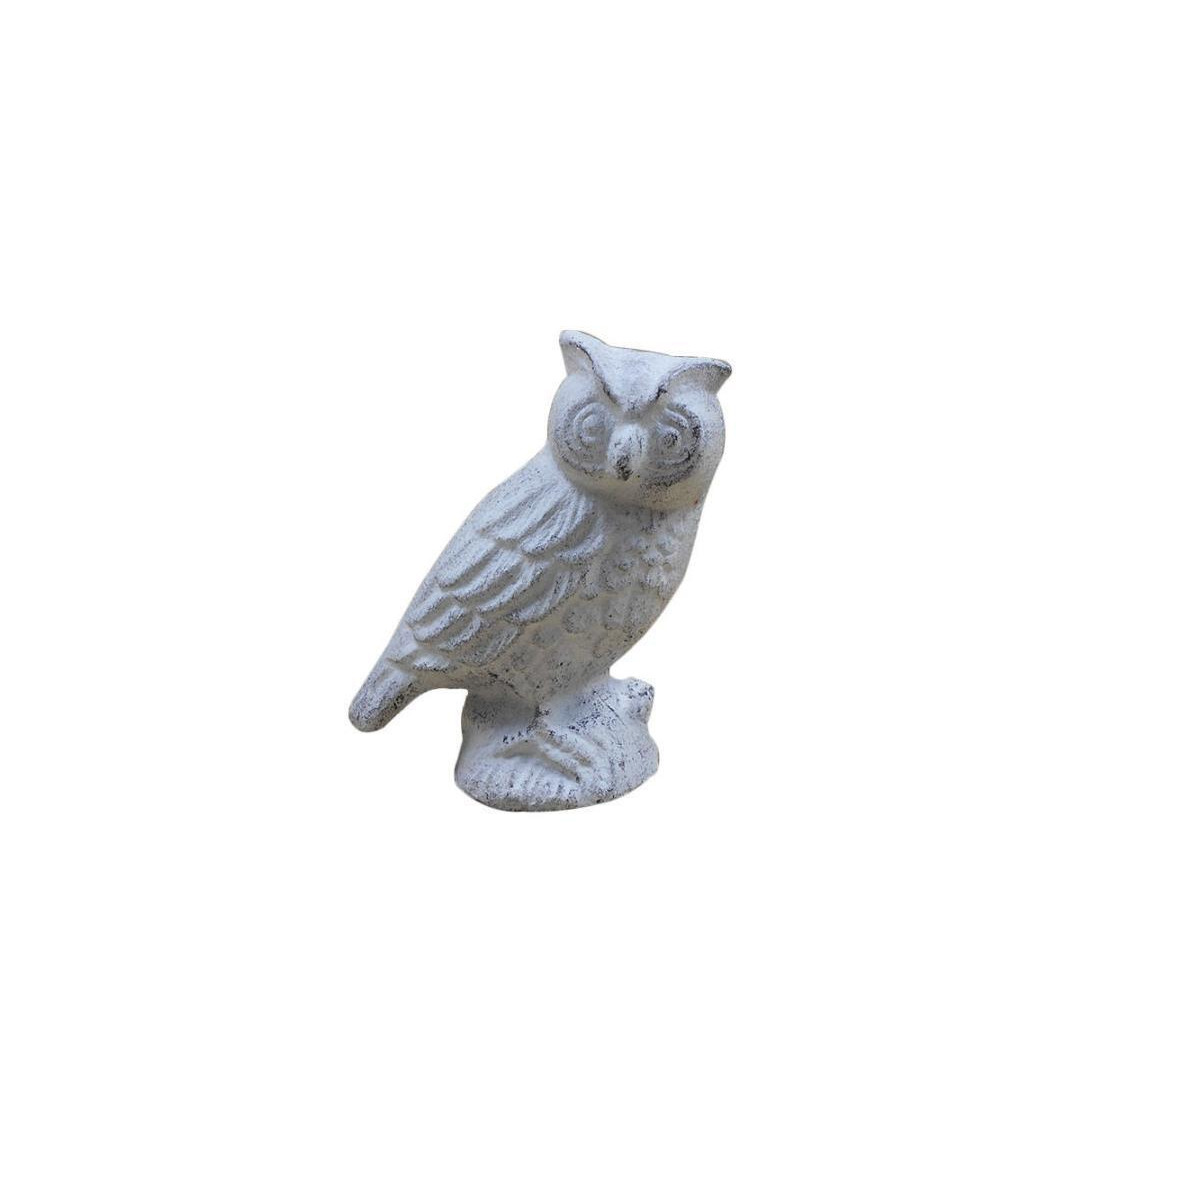 Handcrafted Model Ships K-9283-w 6 x 3 x 5 in. Whitewashed Cast Iron Owl Metal Door Stop